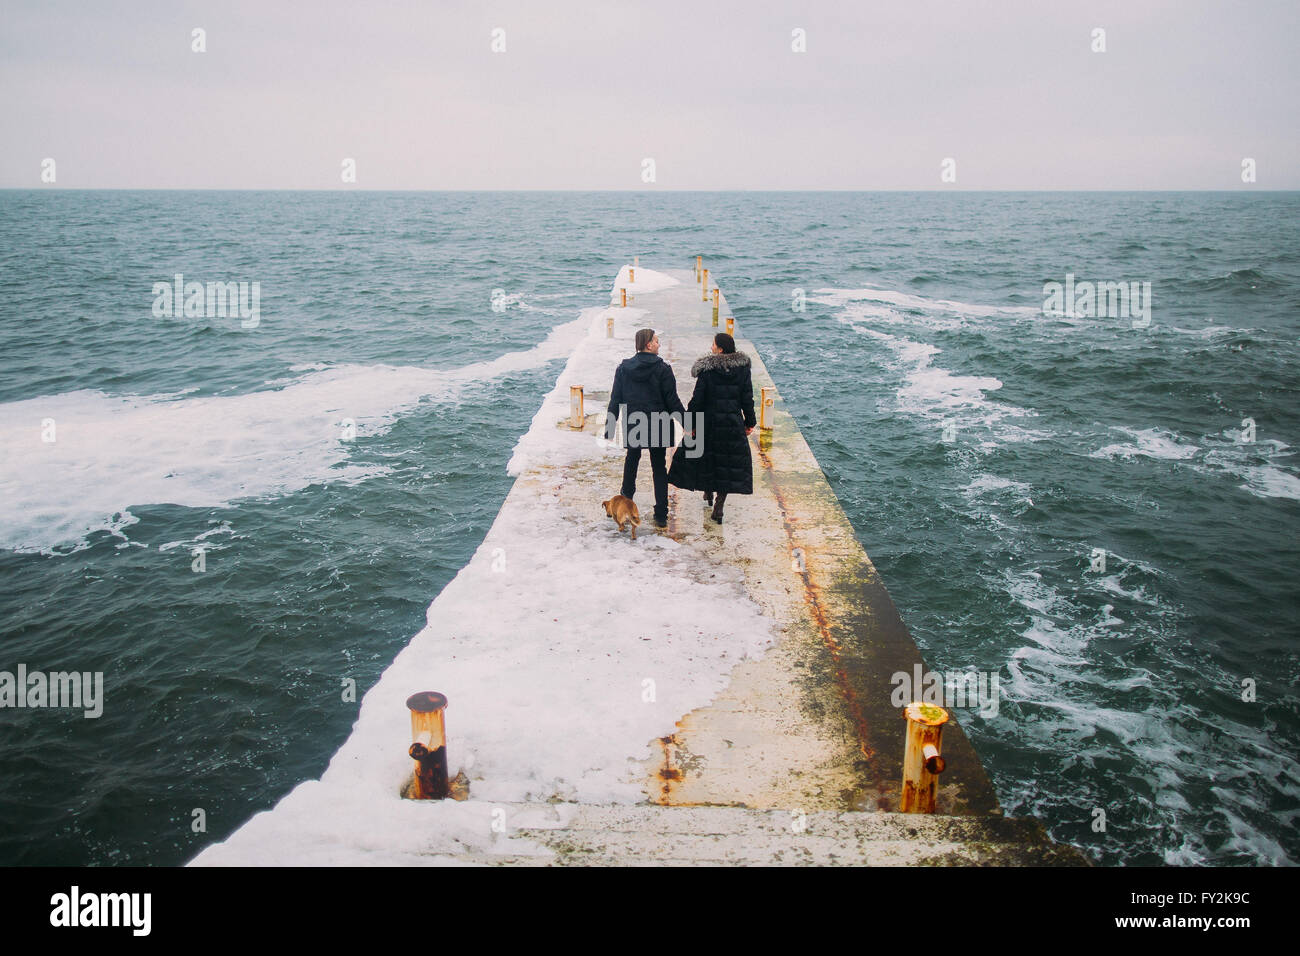 Rear romantic view of a young couple walking together on stoned pier during rainy autumn day. Winter sea background Stock Photo